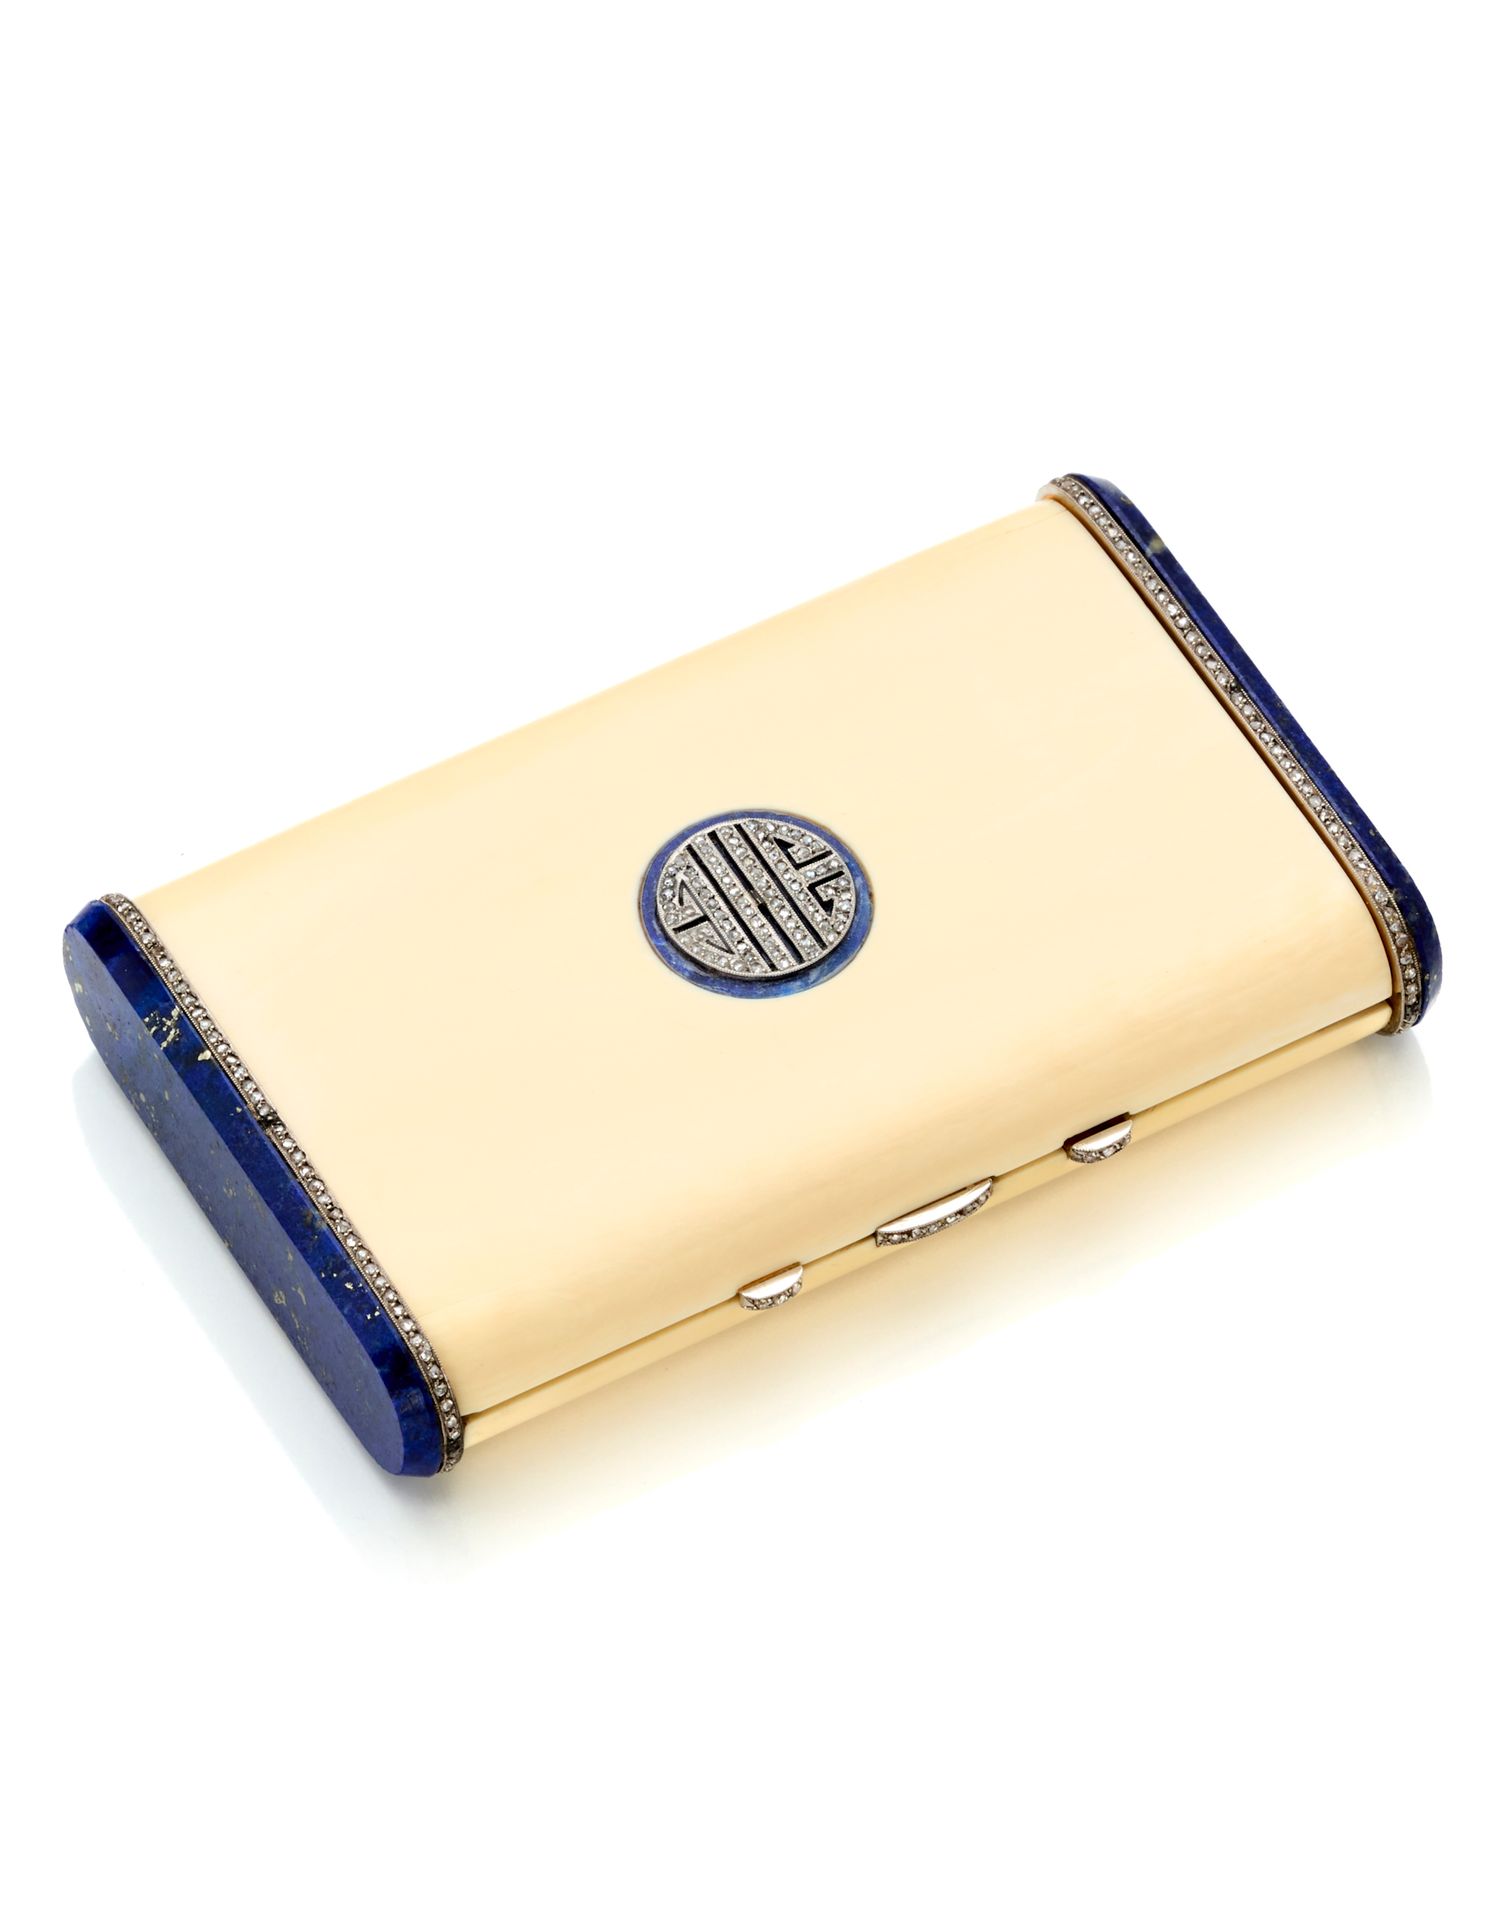 Null 
JANESICH
Yellow gold ivory vanity case with lapis lazuli sides accented wi&hellip;